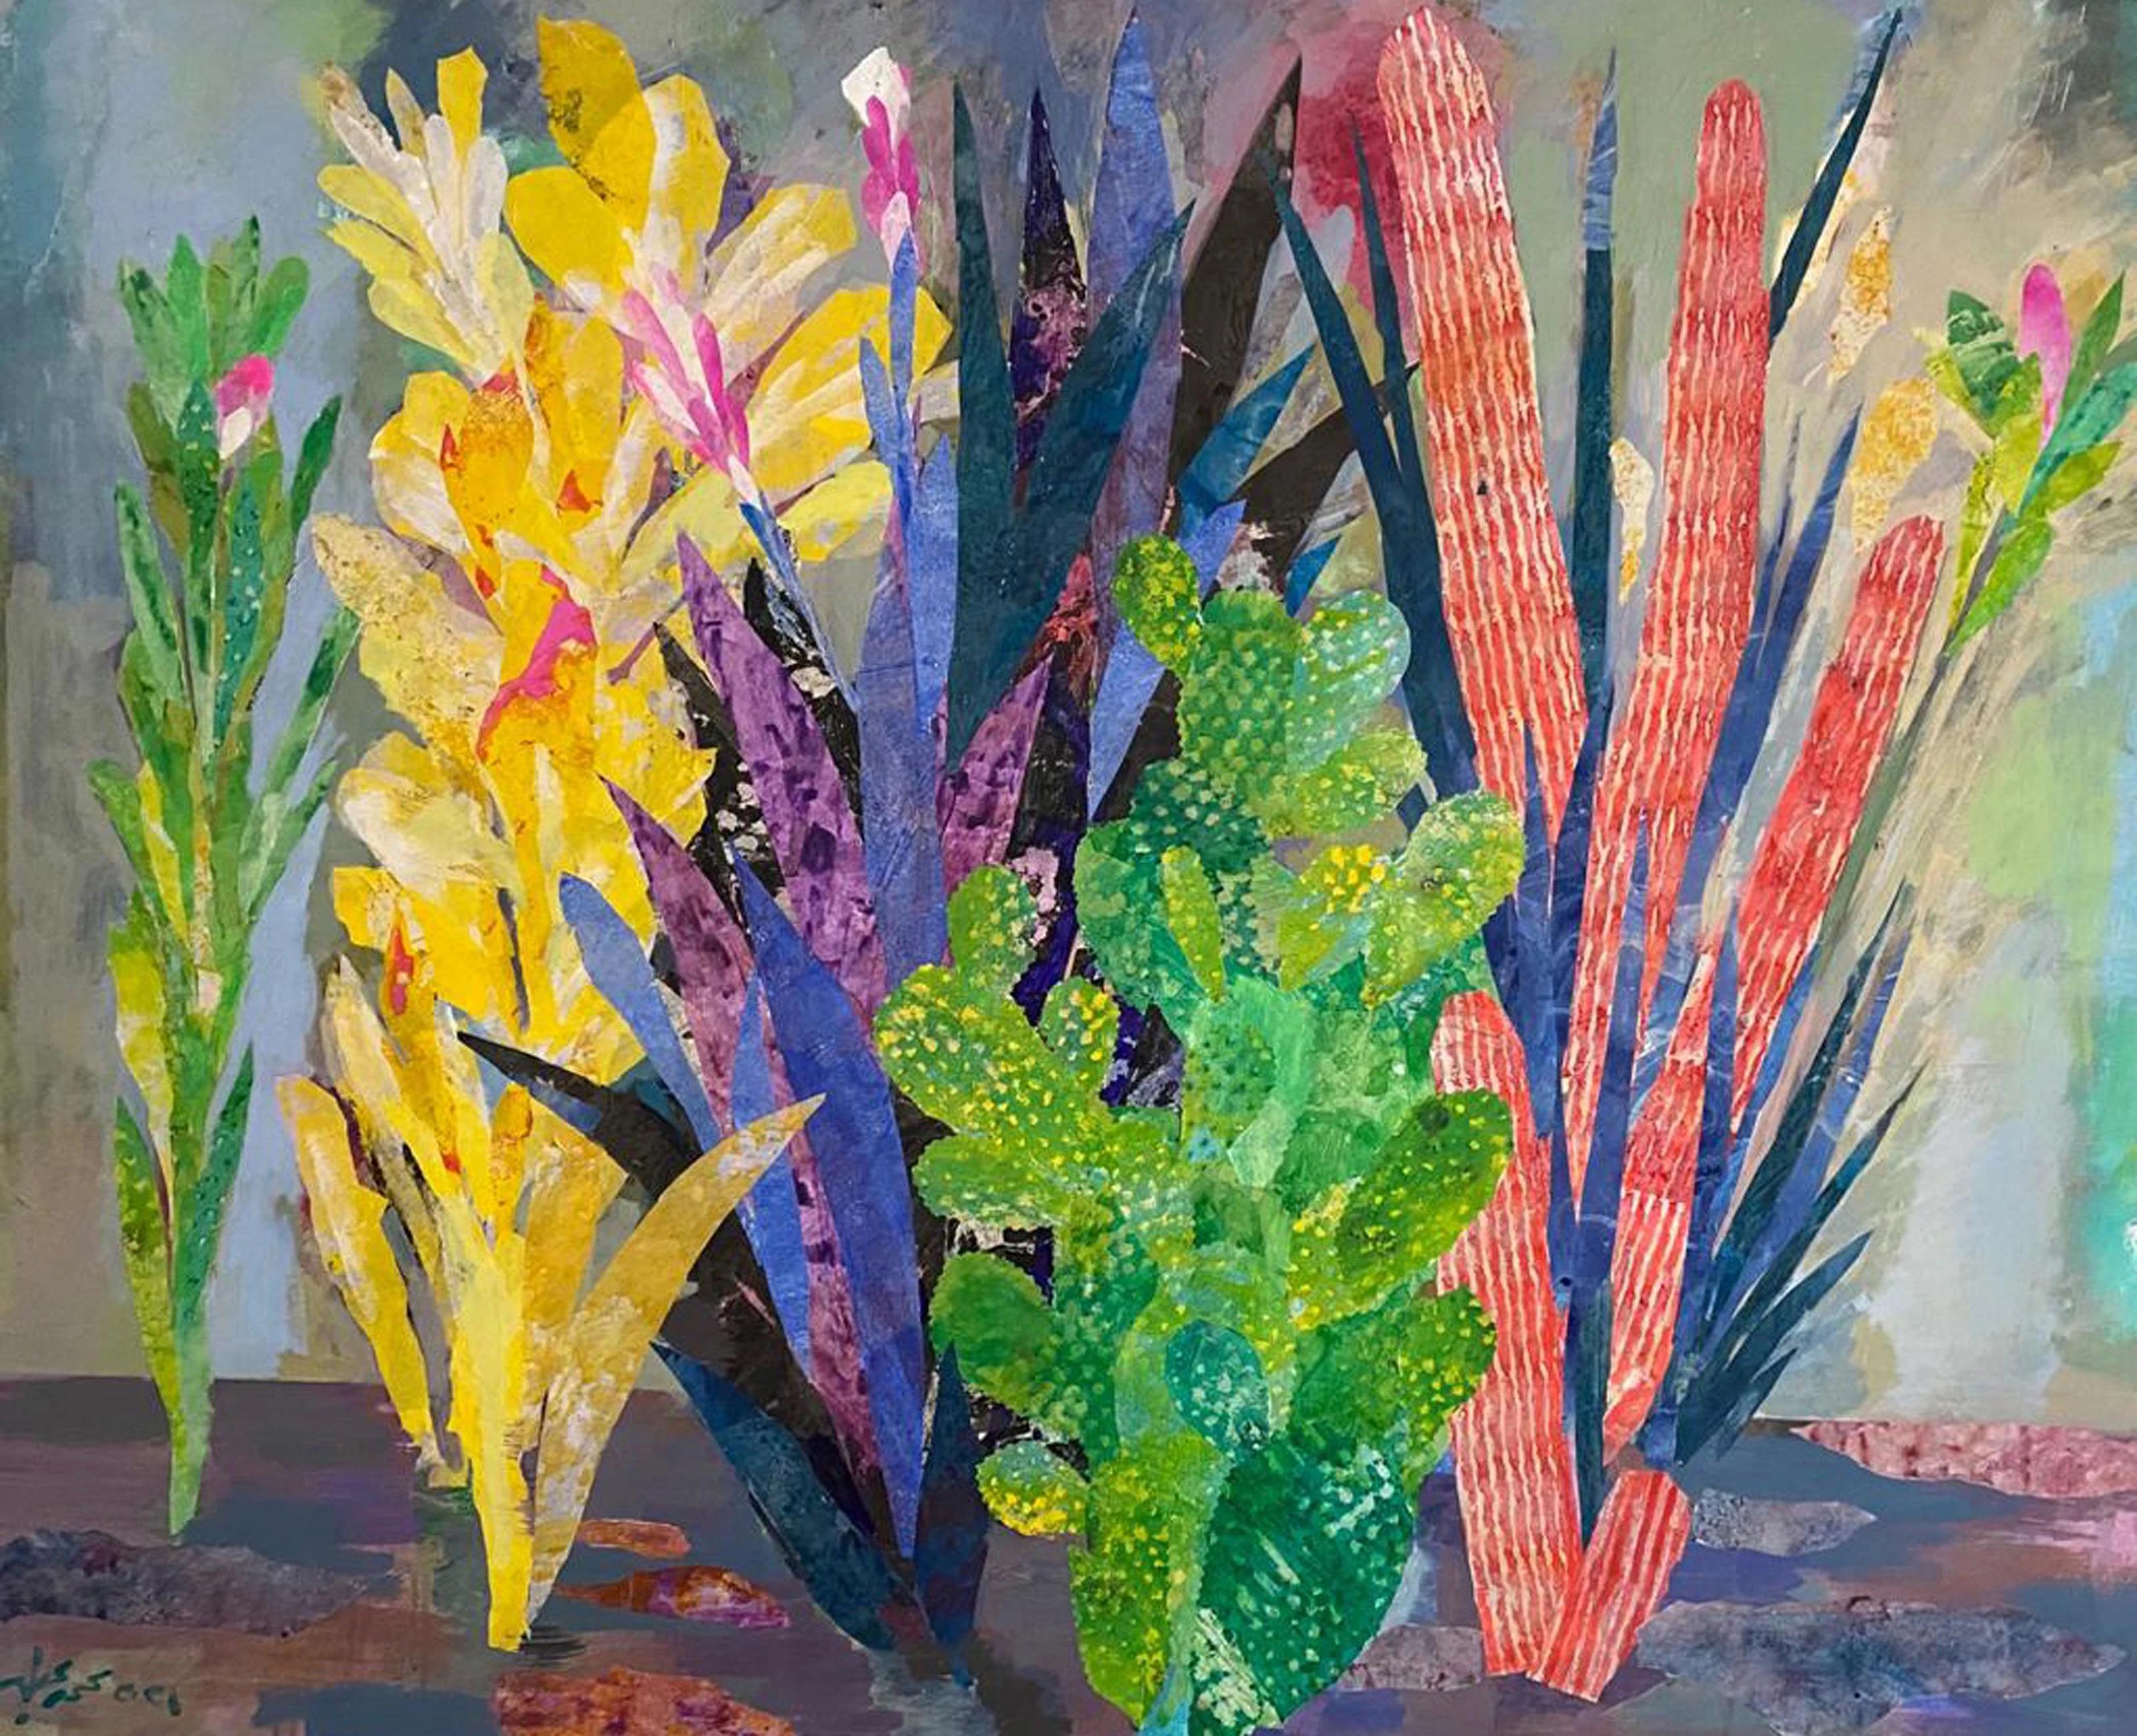 "Cactus Collage" Painting 55" x 63" inch by Mohamed Abla